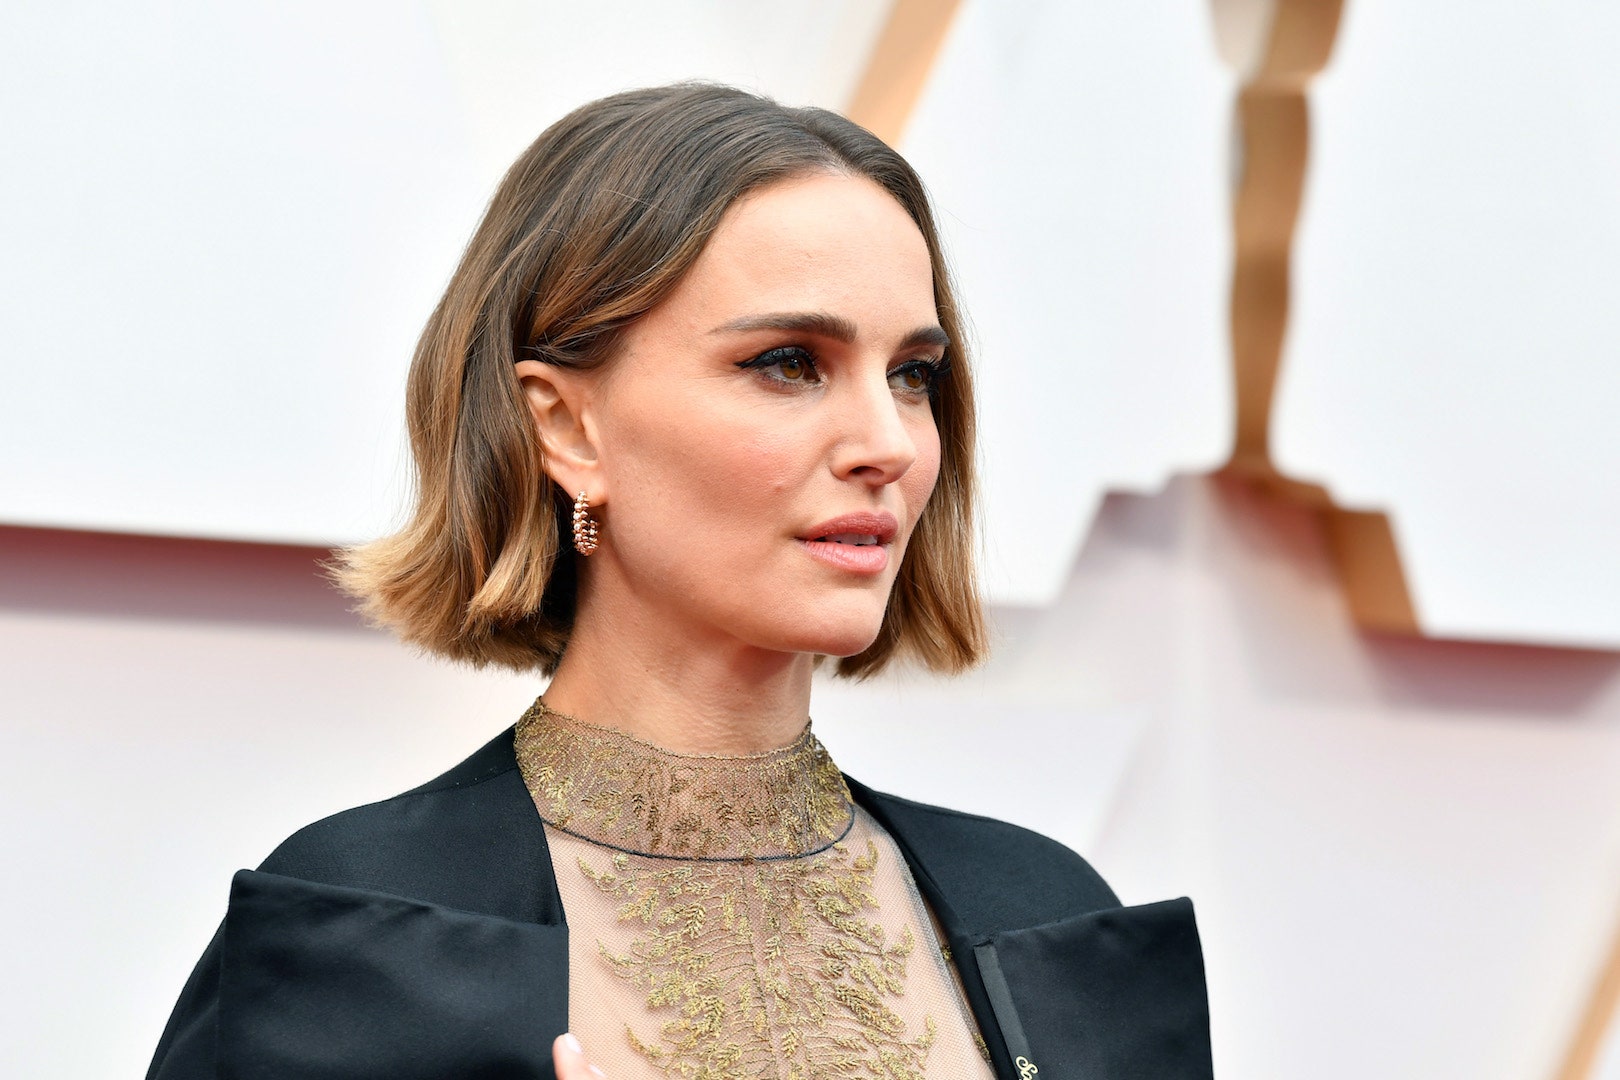 natalie Portman Responds To Rose Mcgowans Cape Diss It Is Inaccurate To Call Me Brave” Vanity Fair